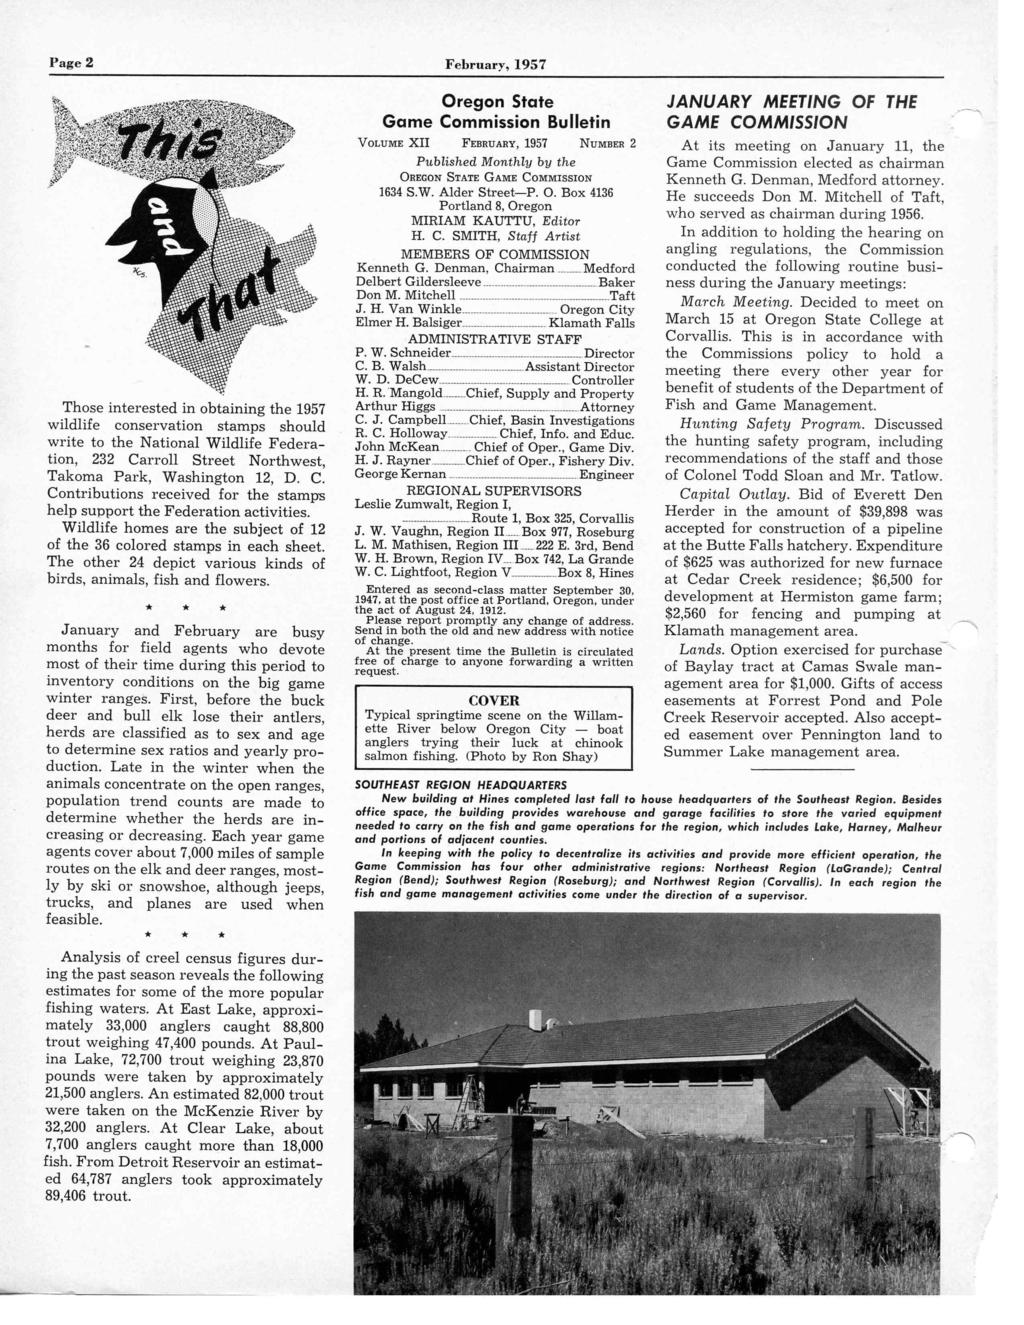 Page 2 February, 1957 Those interested in obtaining the 1957 wildlife conservation stamps should write to the National Wildlife Federation, 232 Carroll Street Northwest, Takoma Park, Washington 12, D.